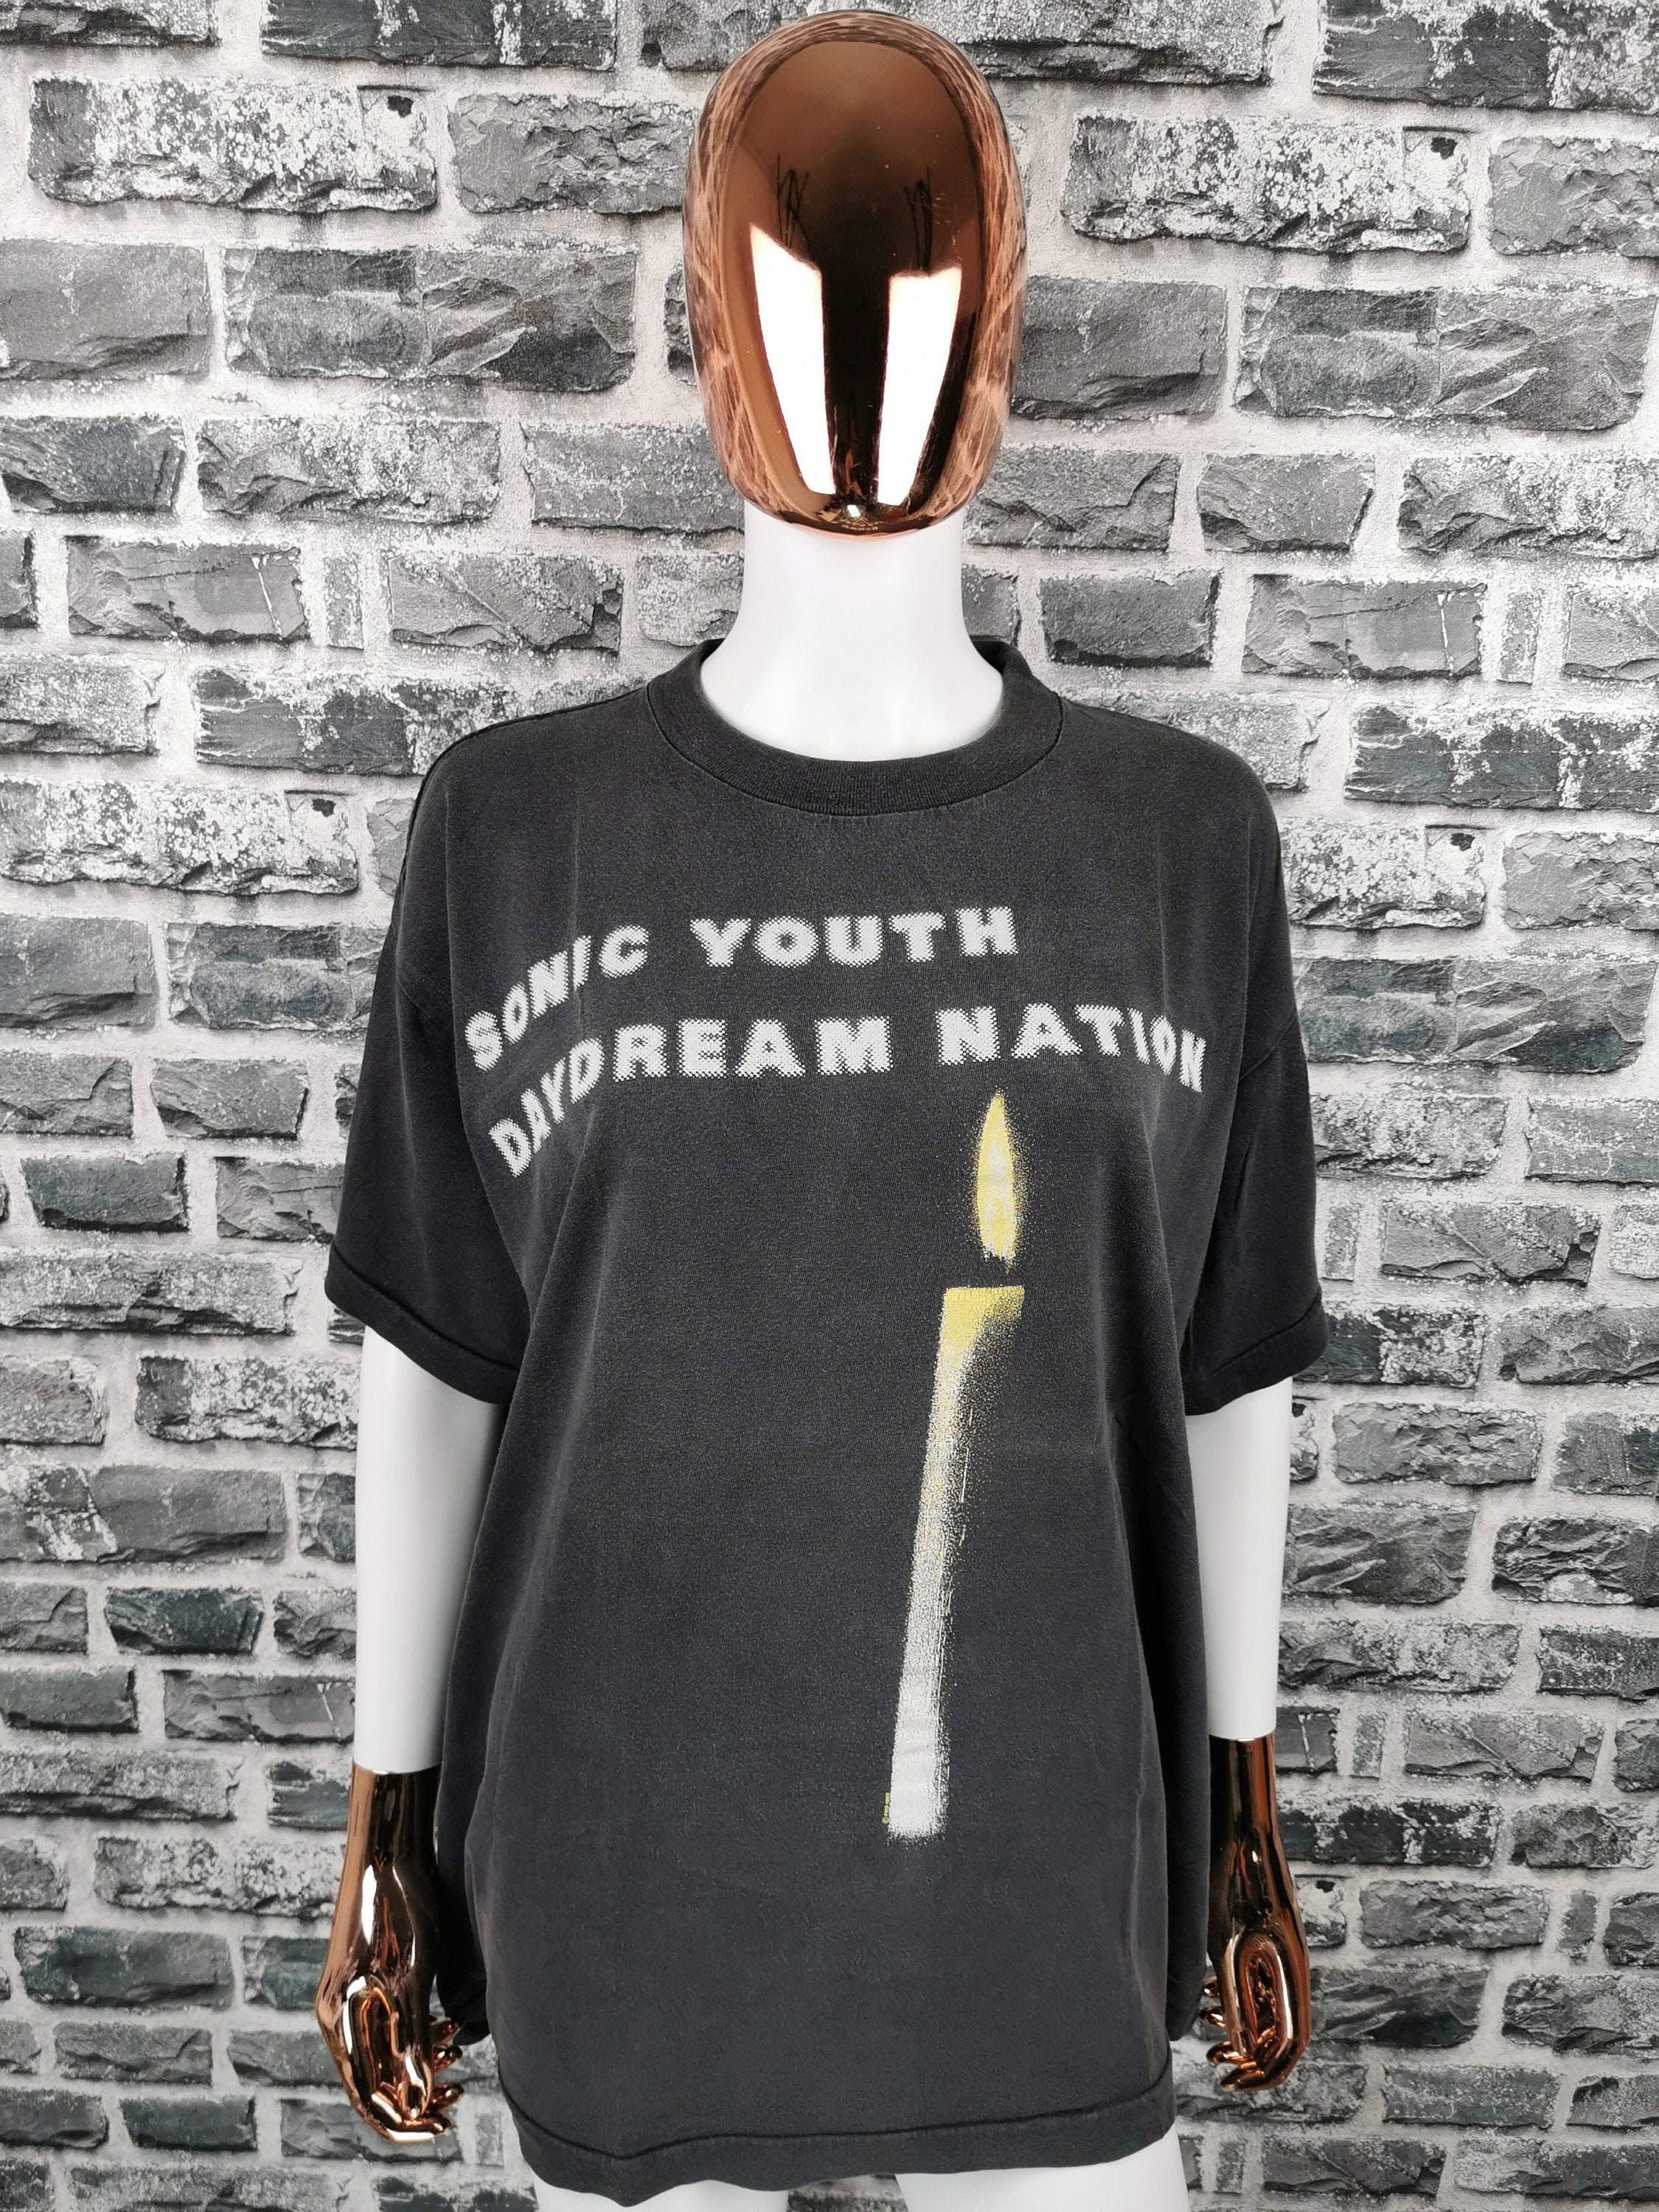 Shopping >sonic youth daydream nation t shirt big sale - OFF 75%